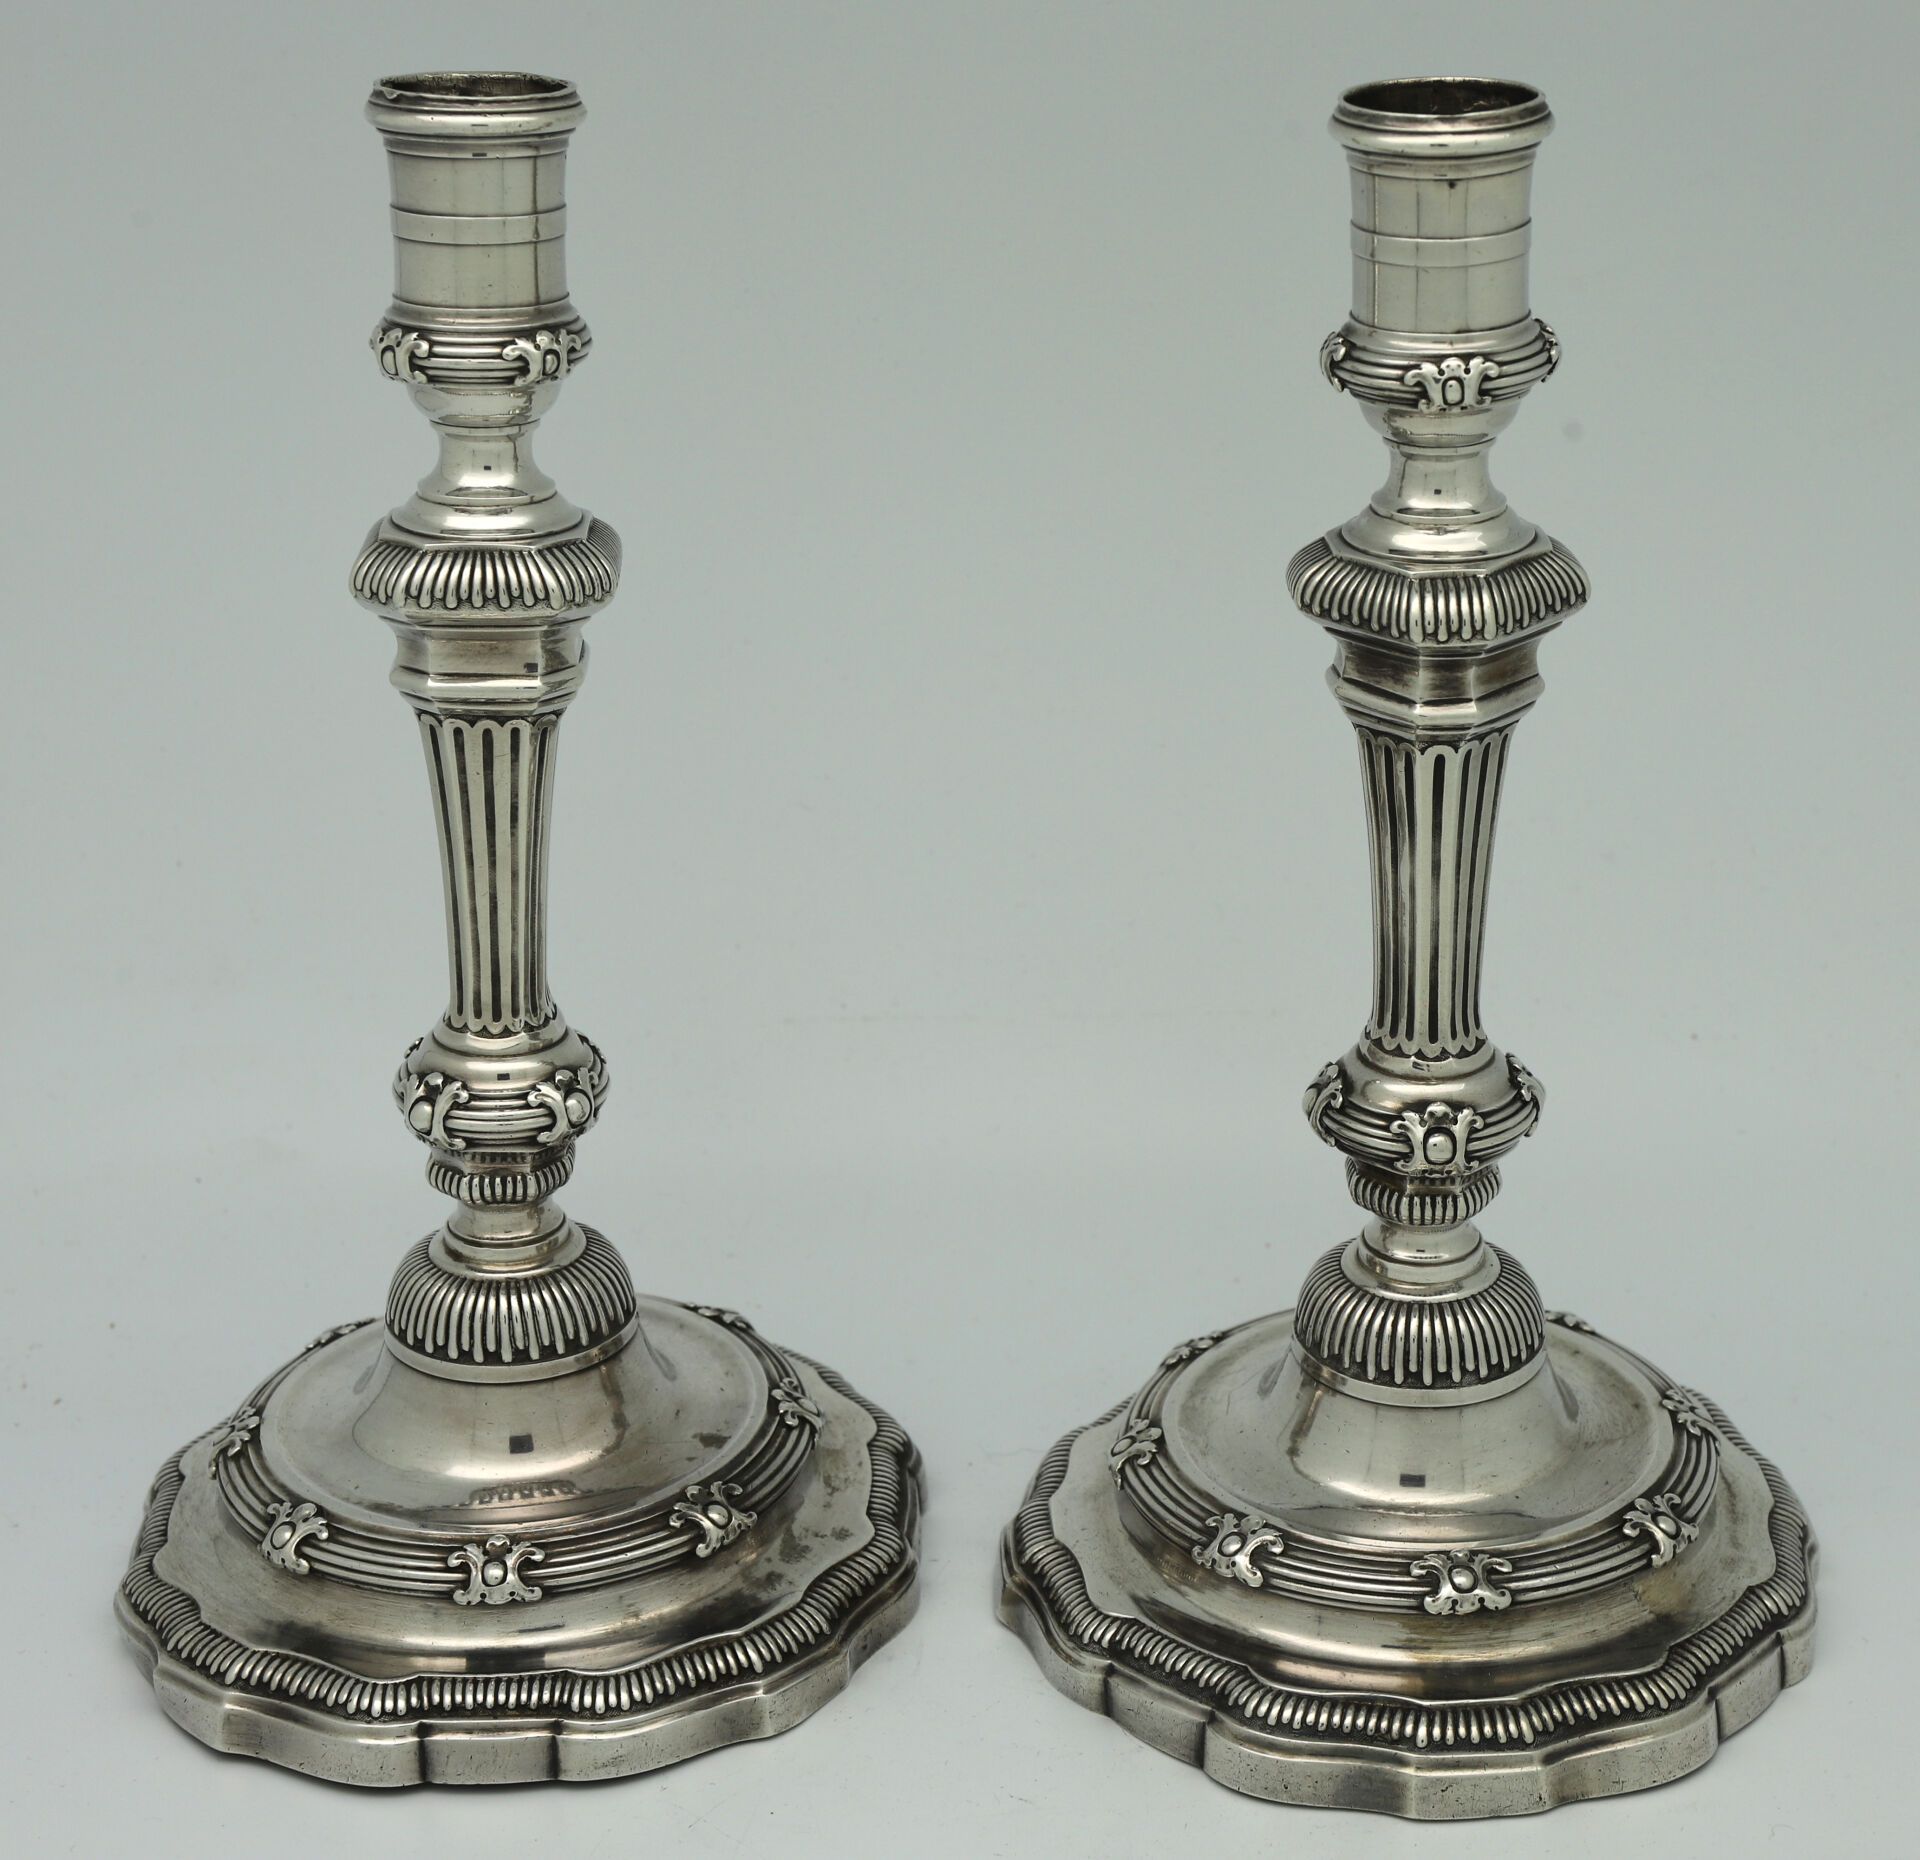 Null Alexis LOIR - Paris 1746/1747 - Pair of silver candlesticks decorated with &hellip;